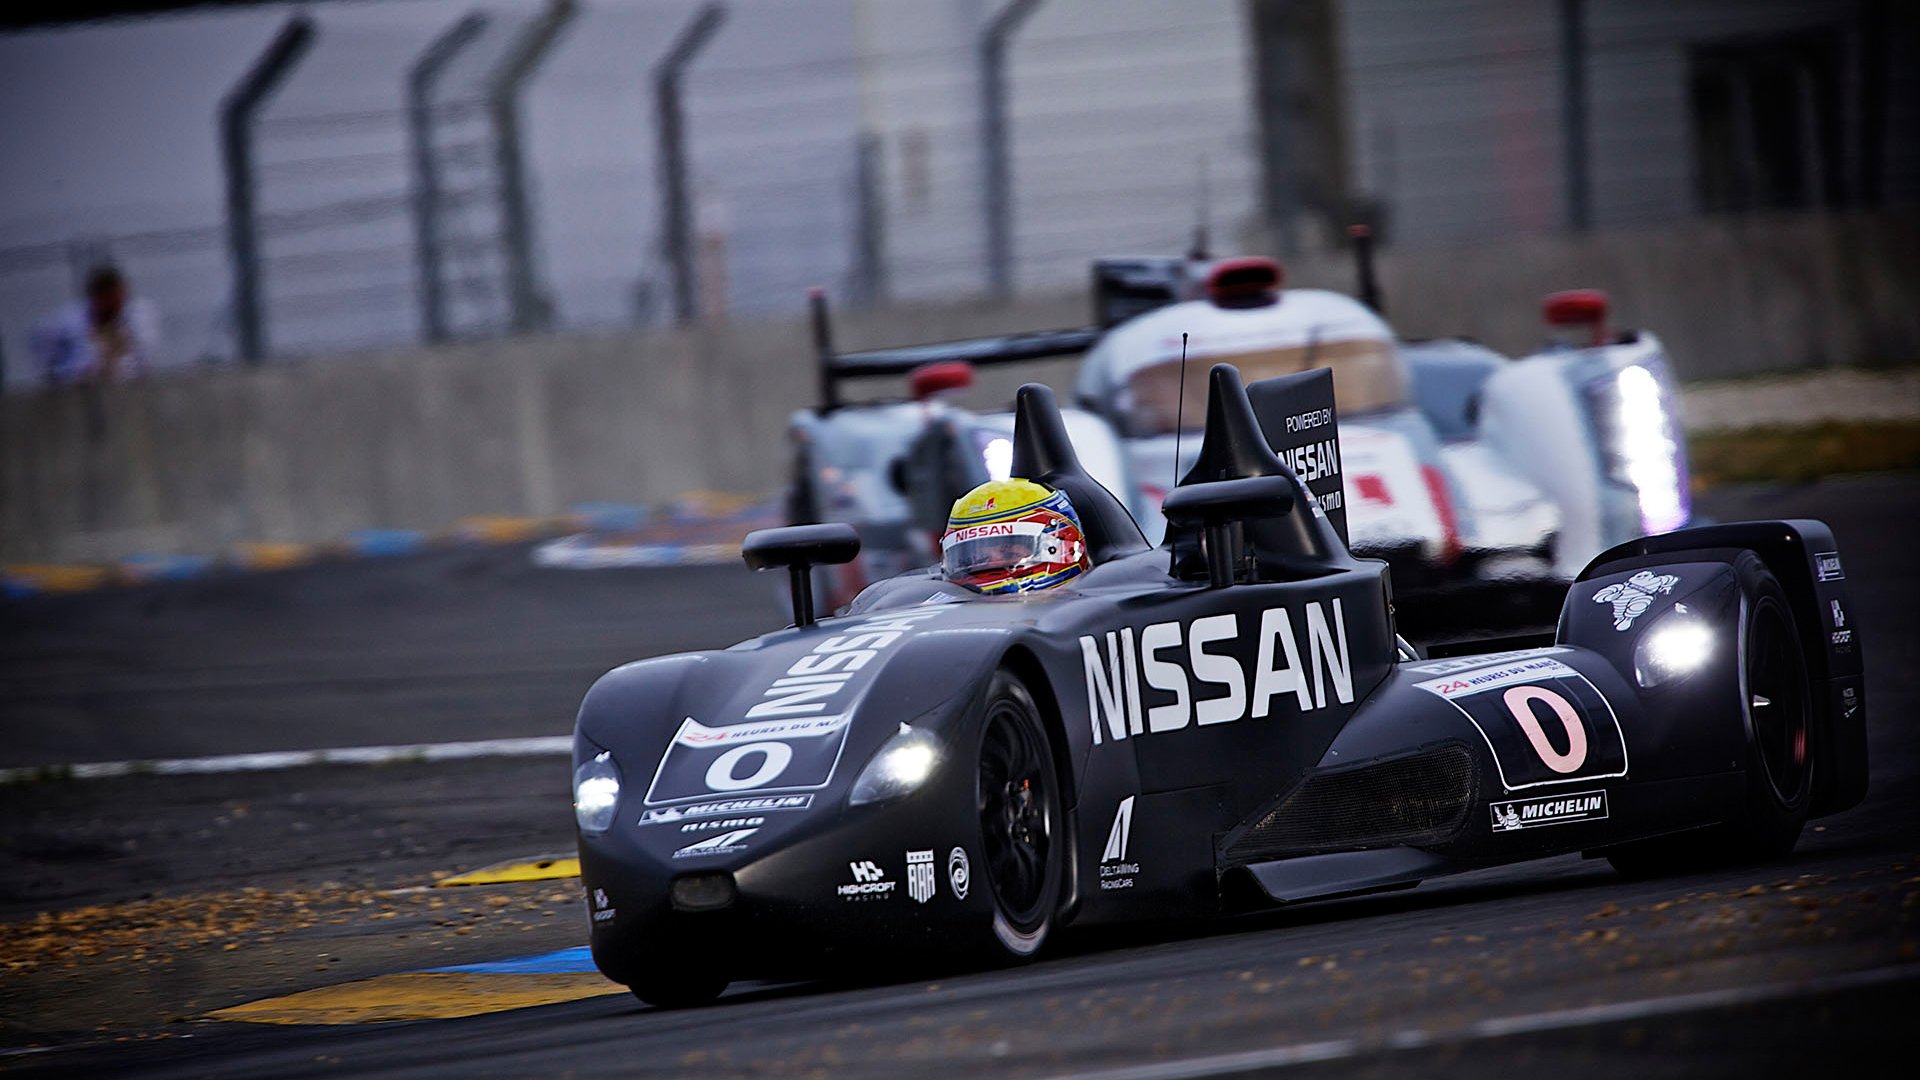 Nissan deltawing performance #3